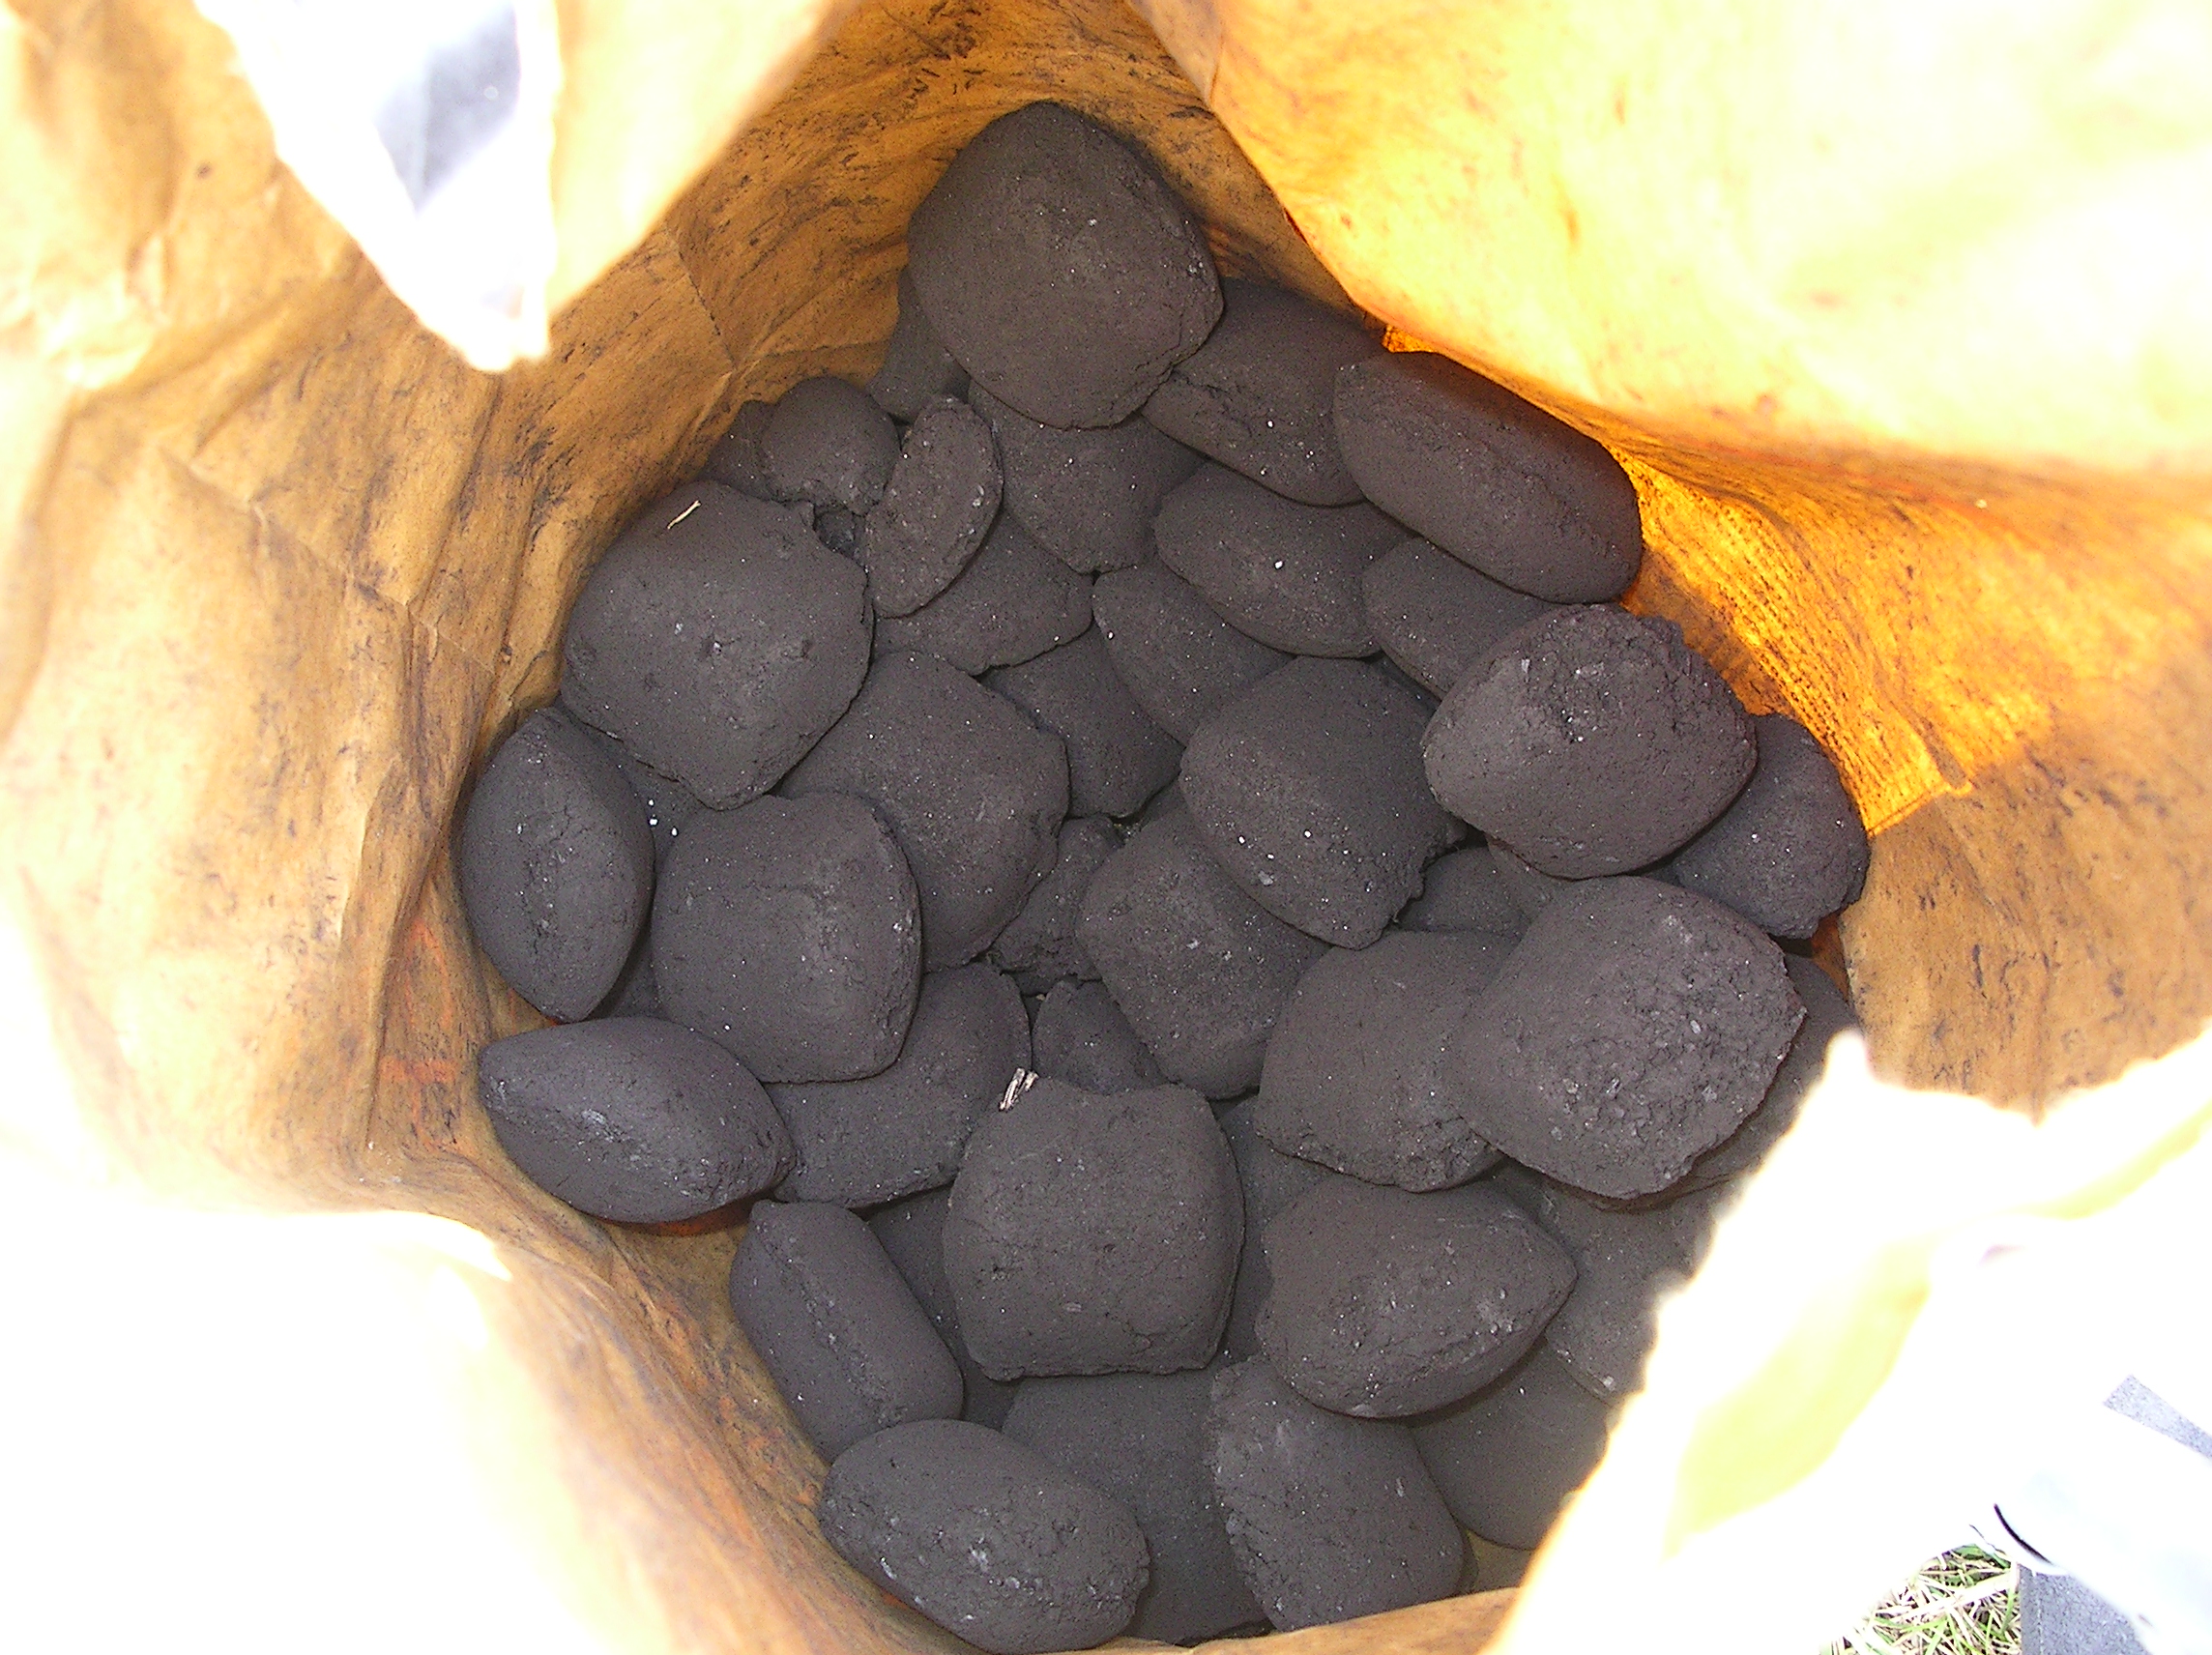 A container with several (maybe 47) lumps of coal in it.